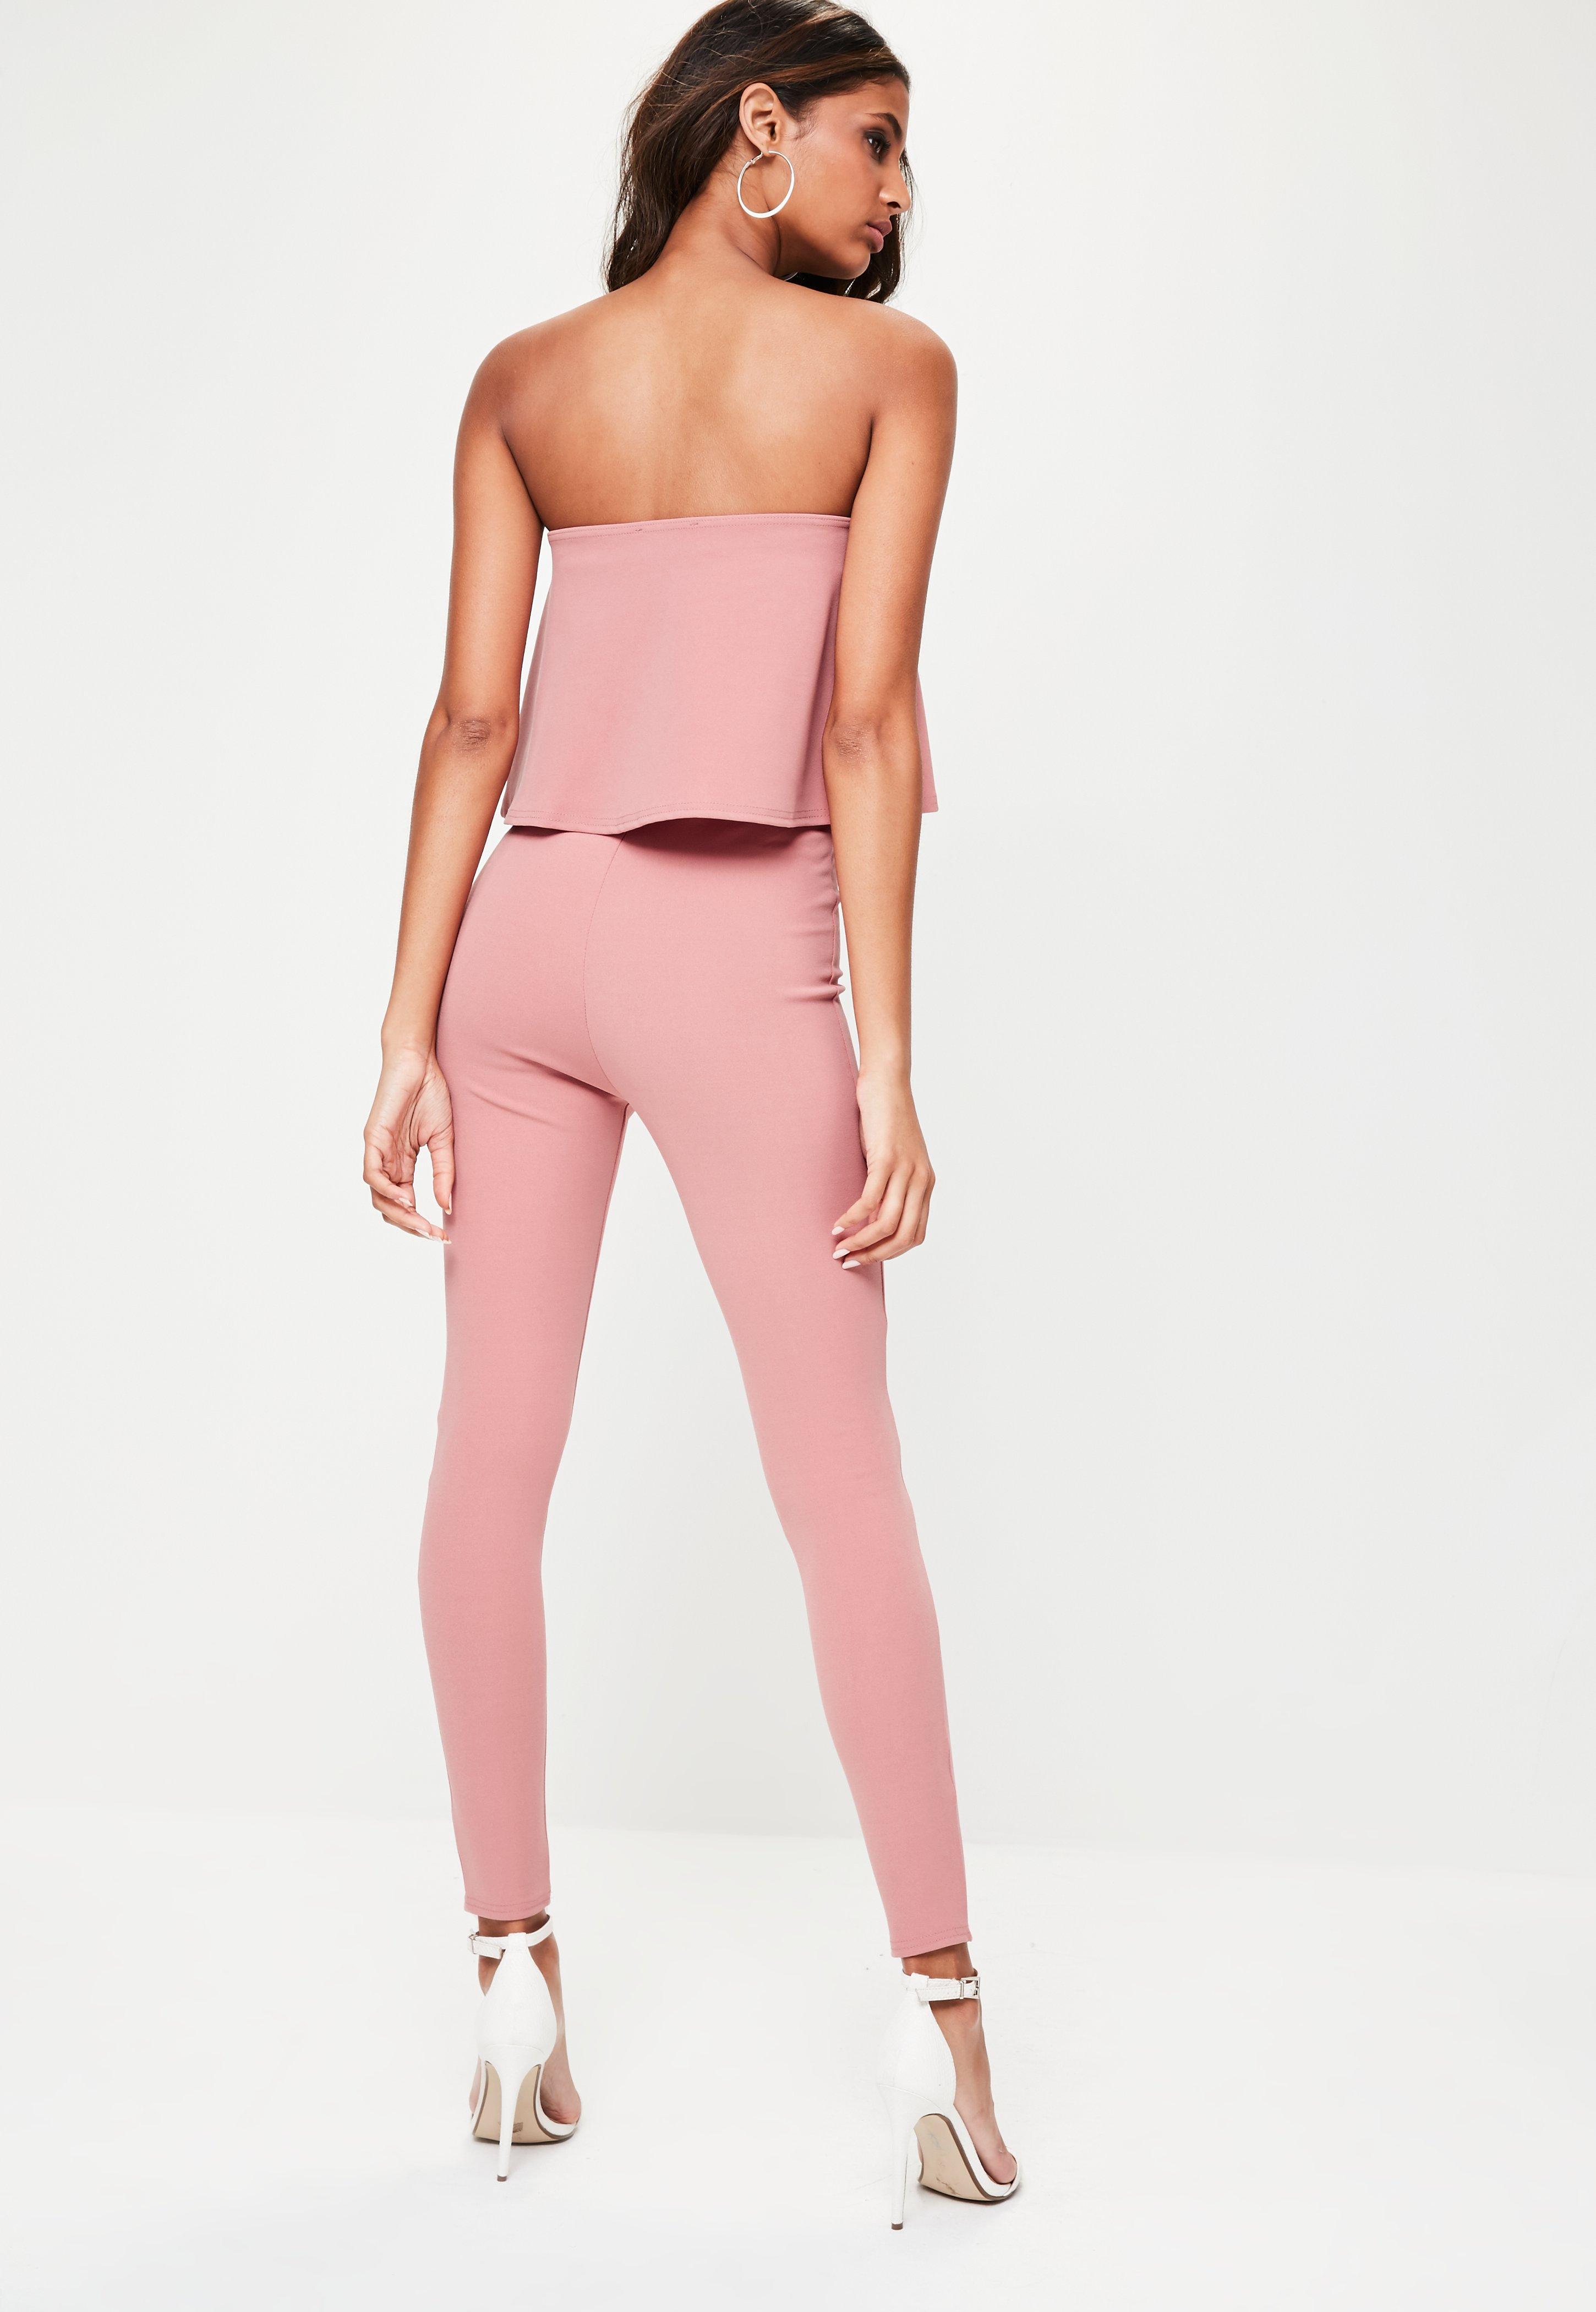 Lyst - Missguided Pink Bandeau Unitard Jumpsuit in Pink